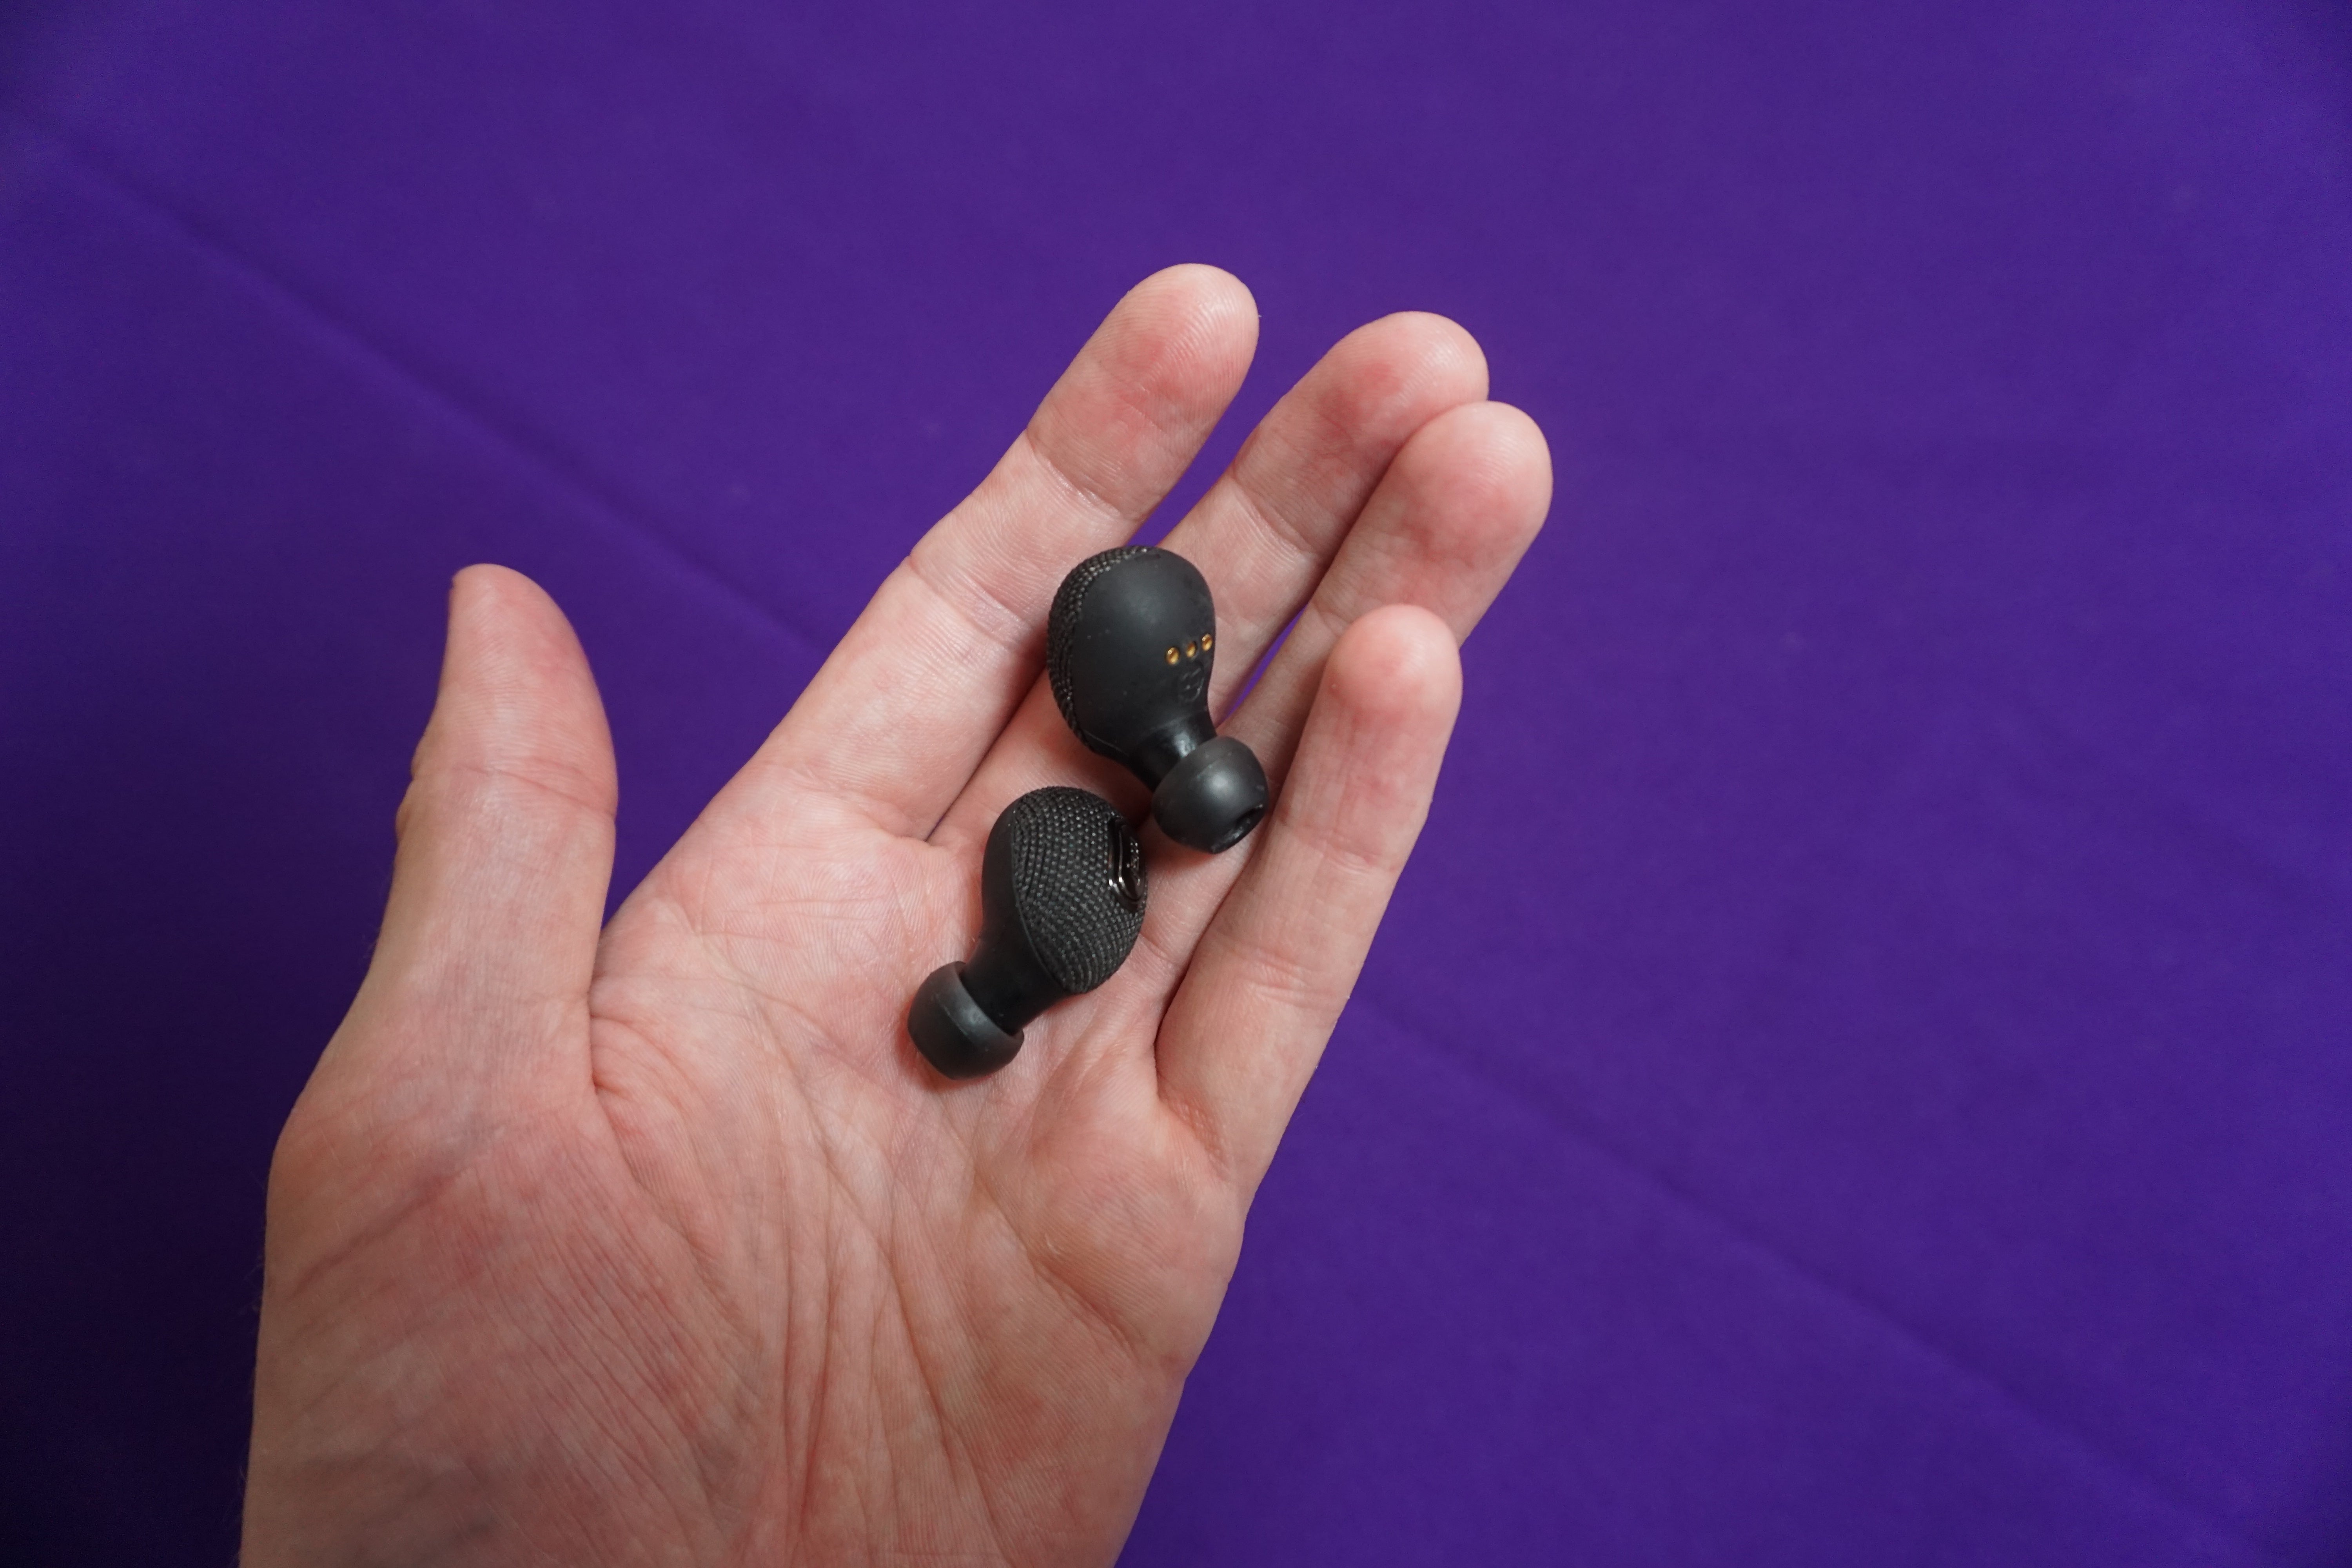 Hand holding Jam Ultra wireless earbuds on purple background